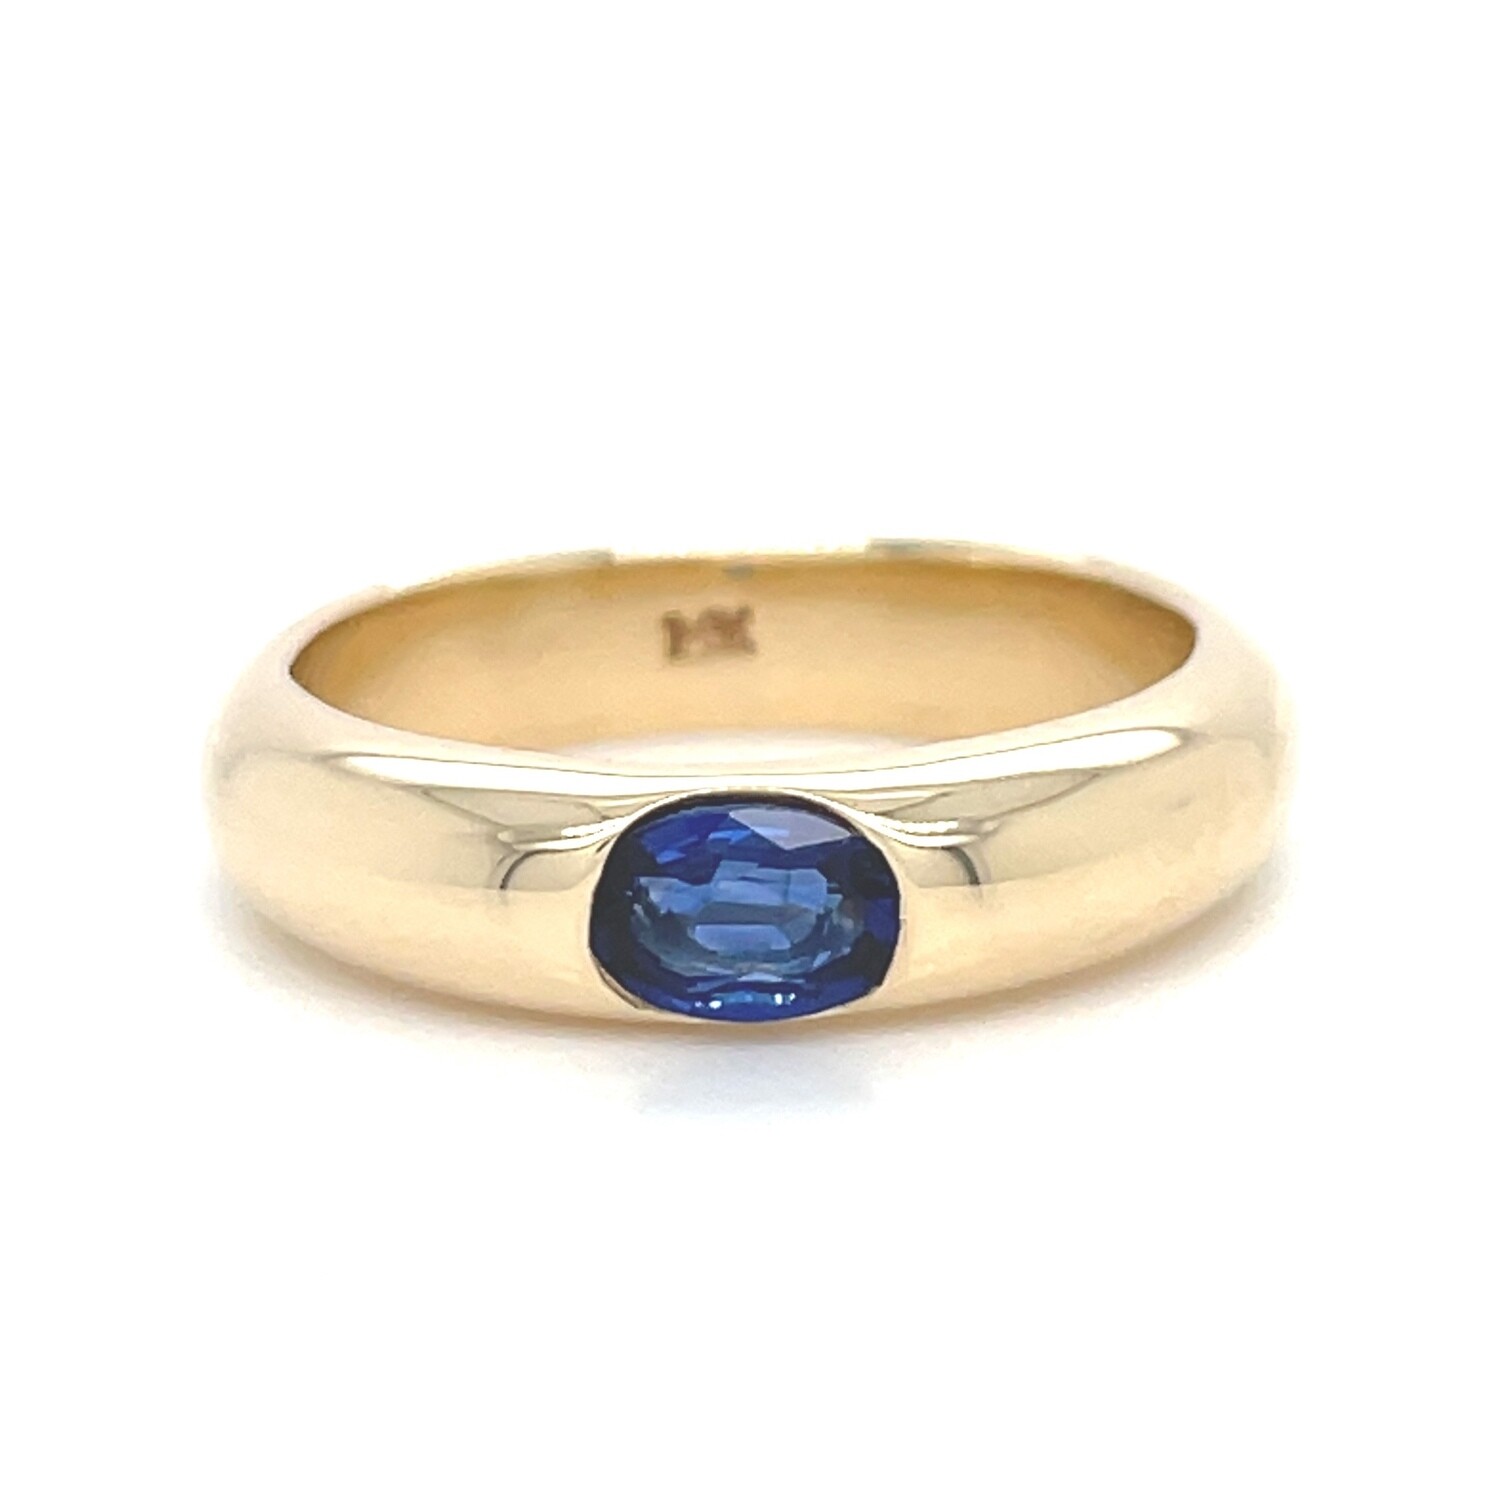 Blue Sapphire Oval Flush Mount Ring in 14k Yellow Gold